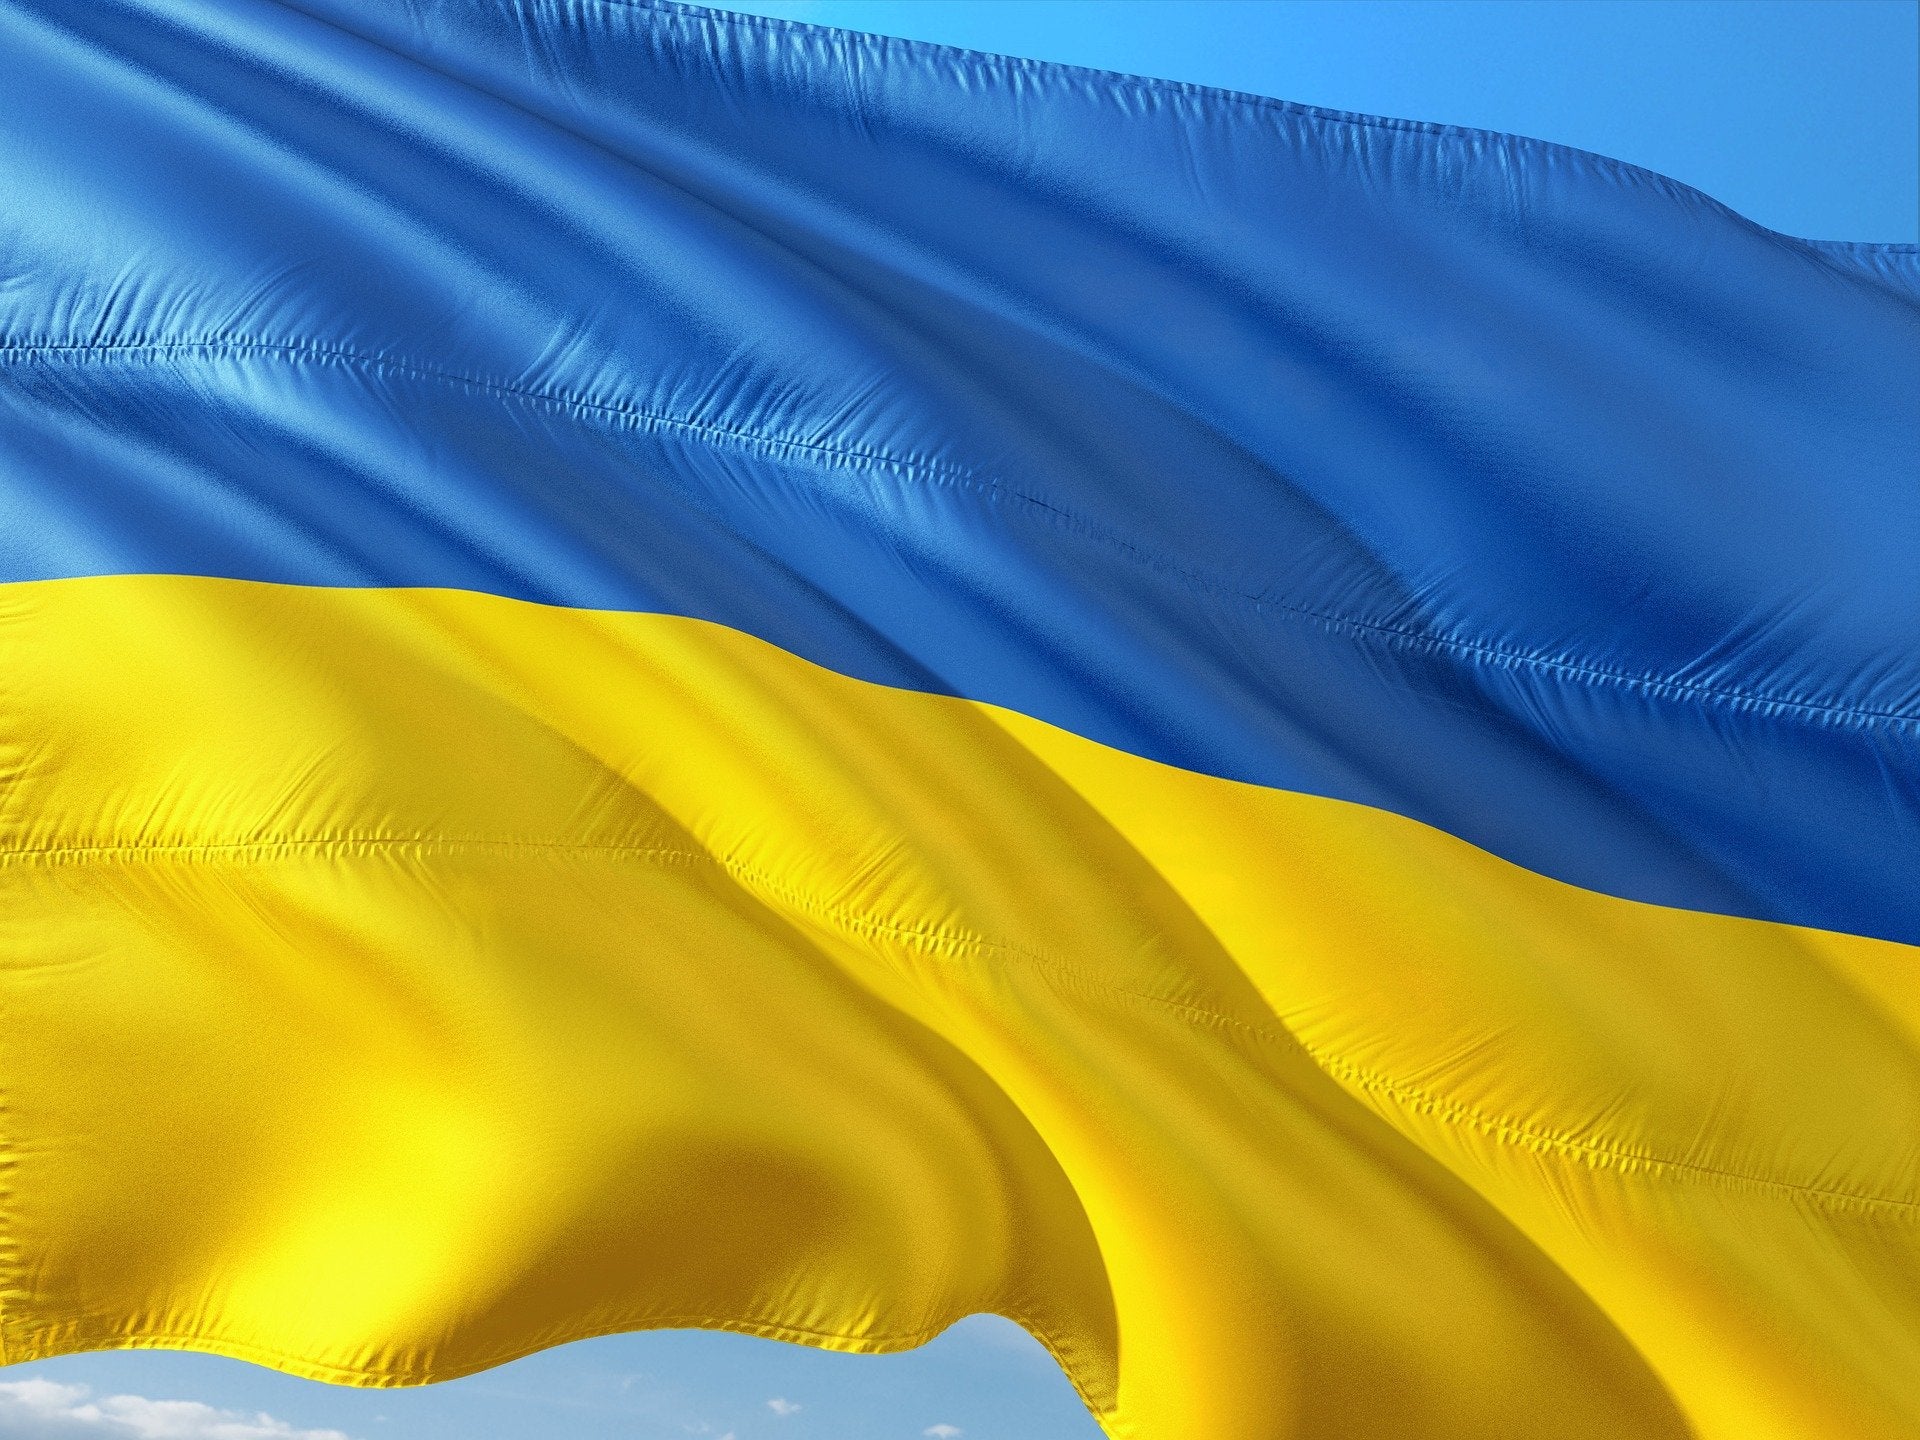 Image for Games industry rallies behind Ukraine in face of Russian invasion